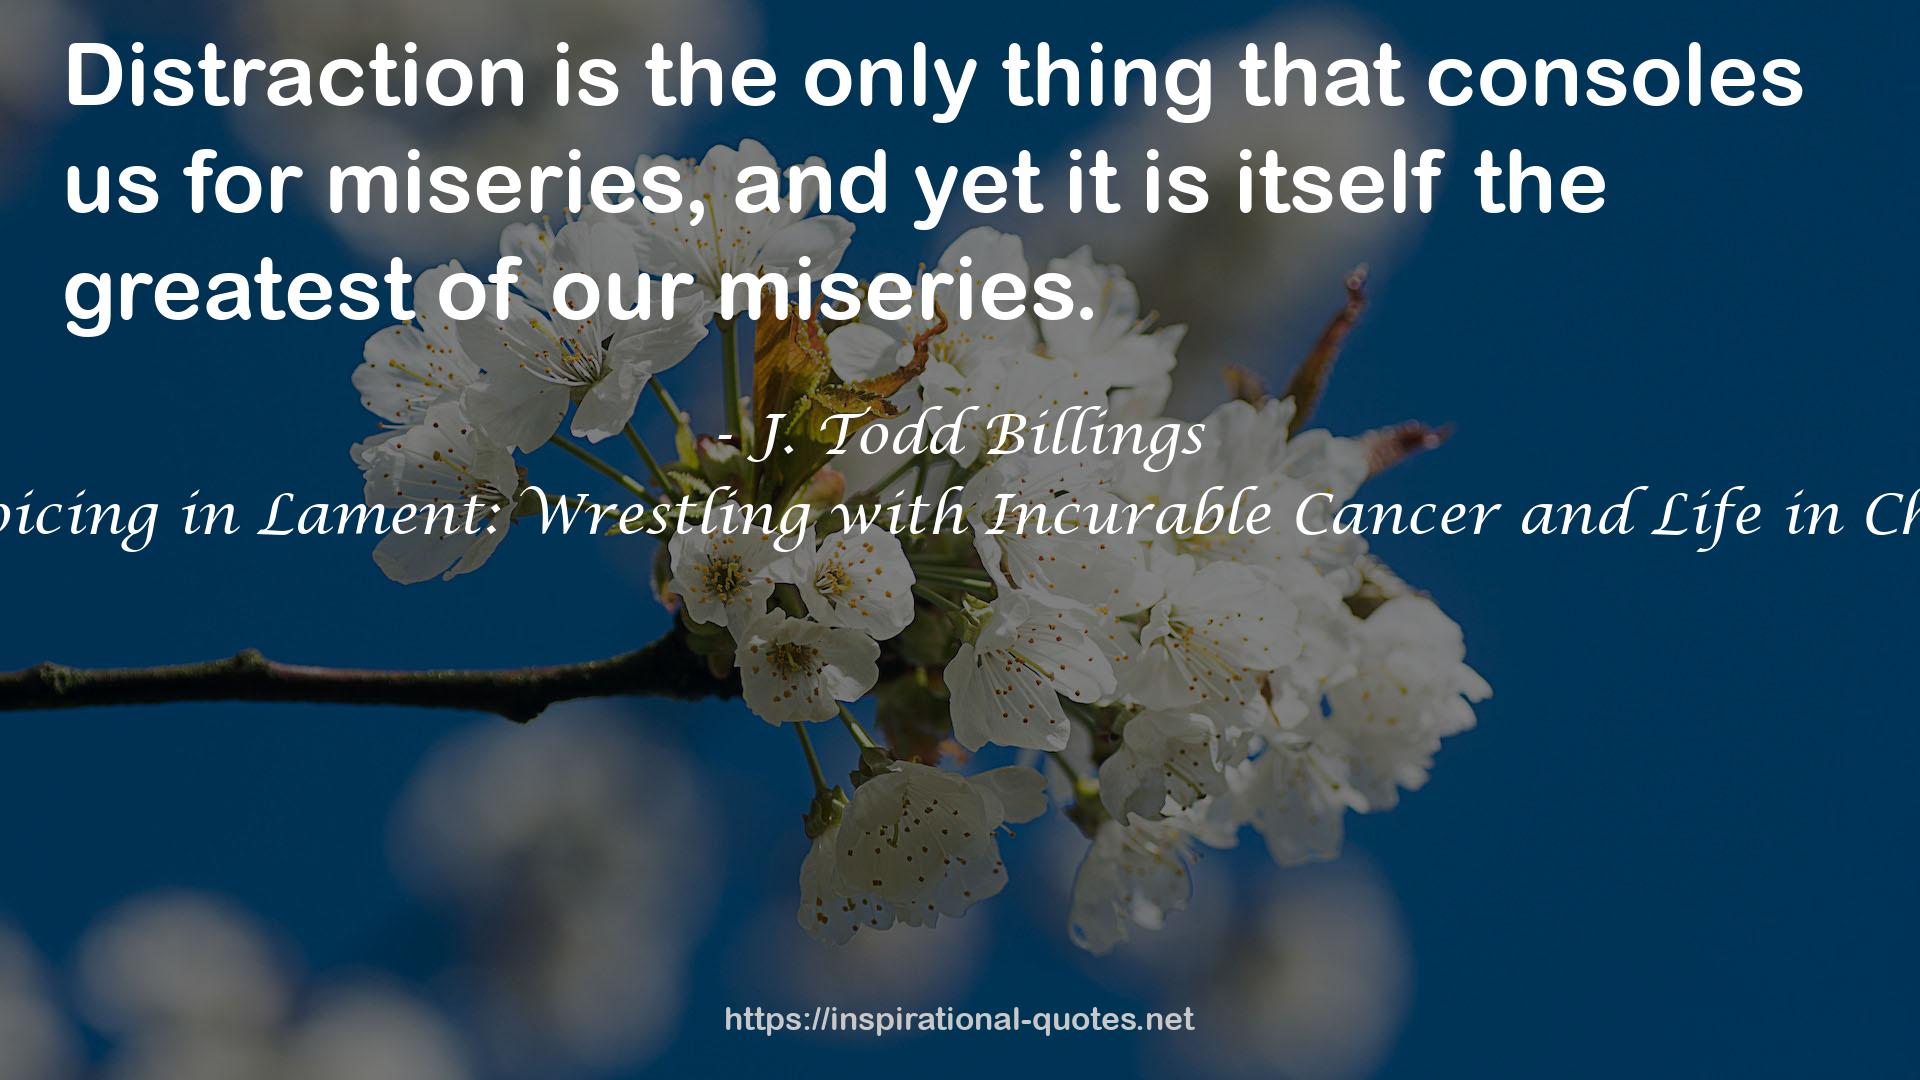 Rejoicing in Lament: Wrestling with Incurable Cancer and Life in Christ QUOTES